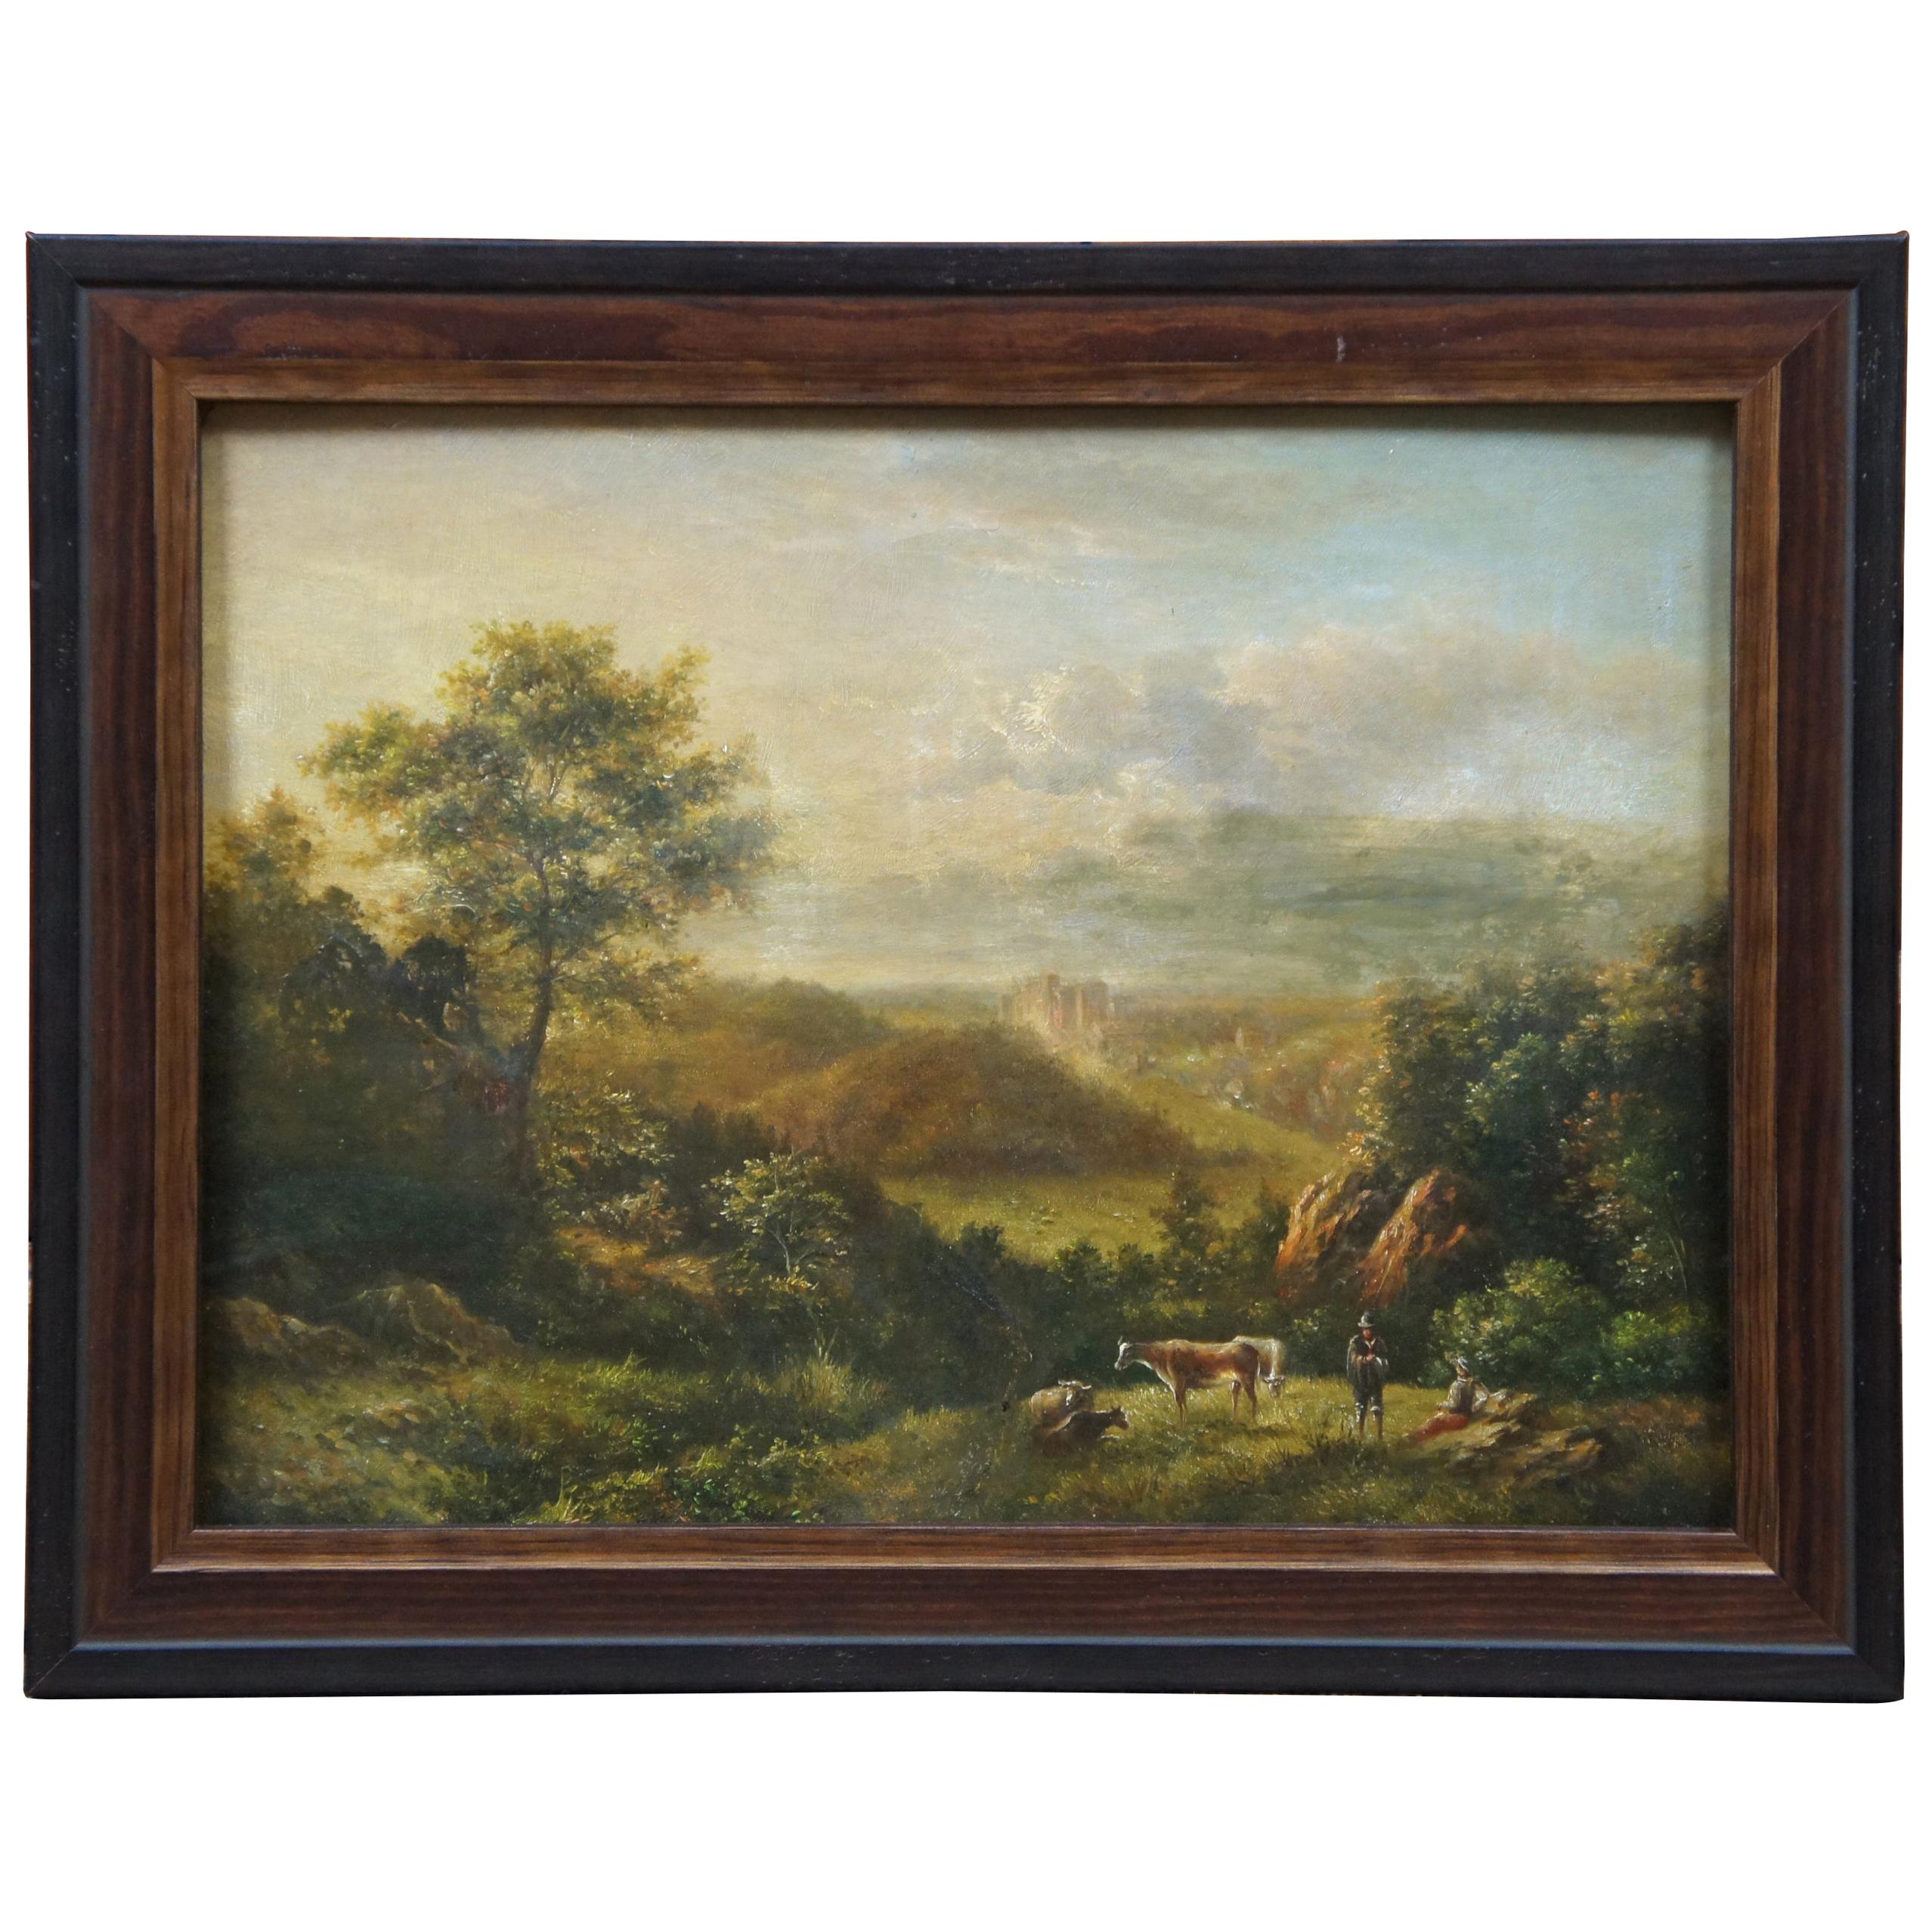 Antique European Landscape Oil Painting on Board Countryside Cattle Farm Cow